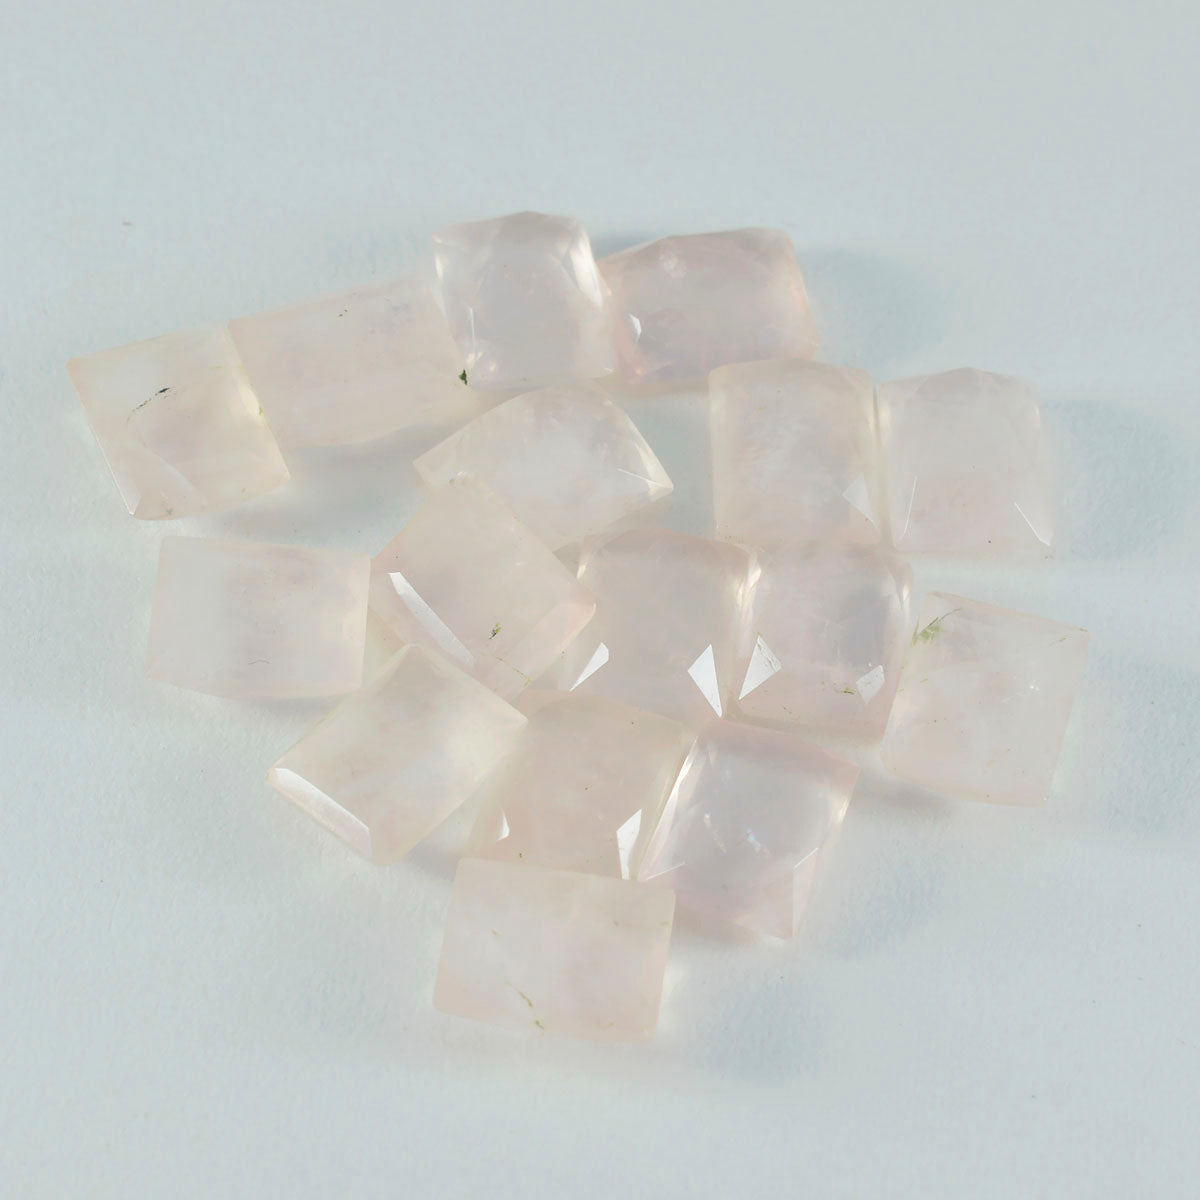 Riyogems 1PC Pink Rose Quartz Faceted 6x8 mm Octagon Shape awesome Quality Loose Stone